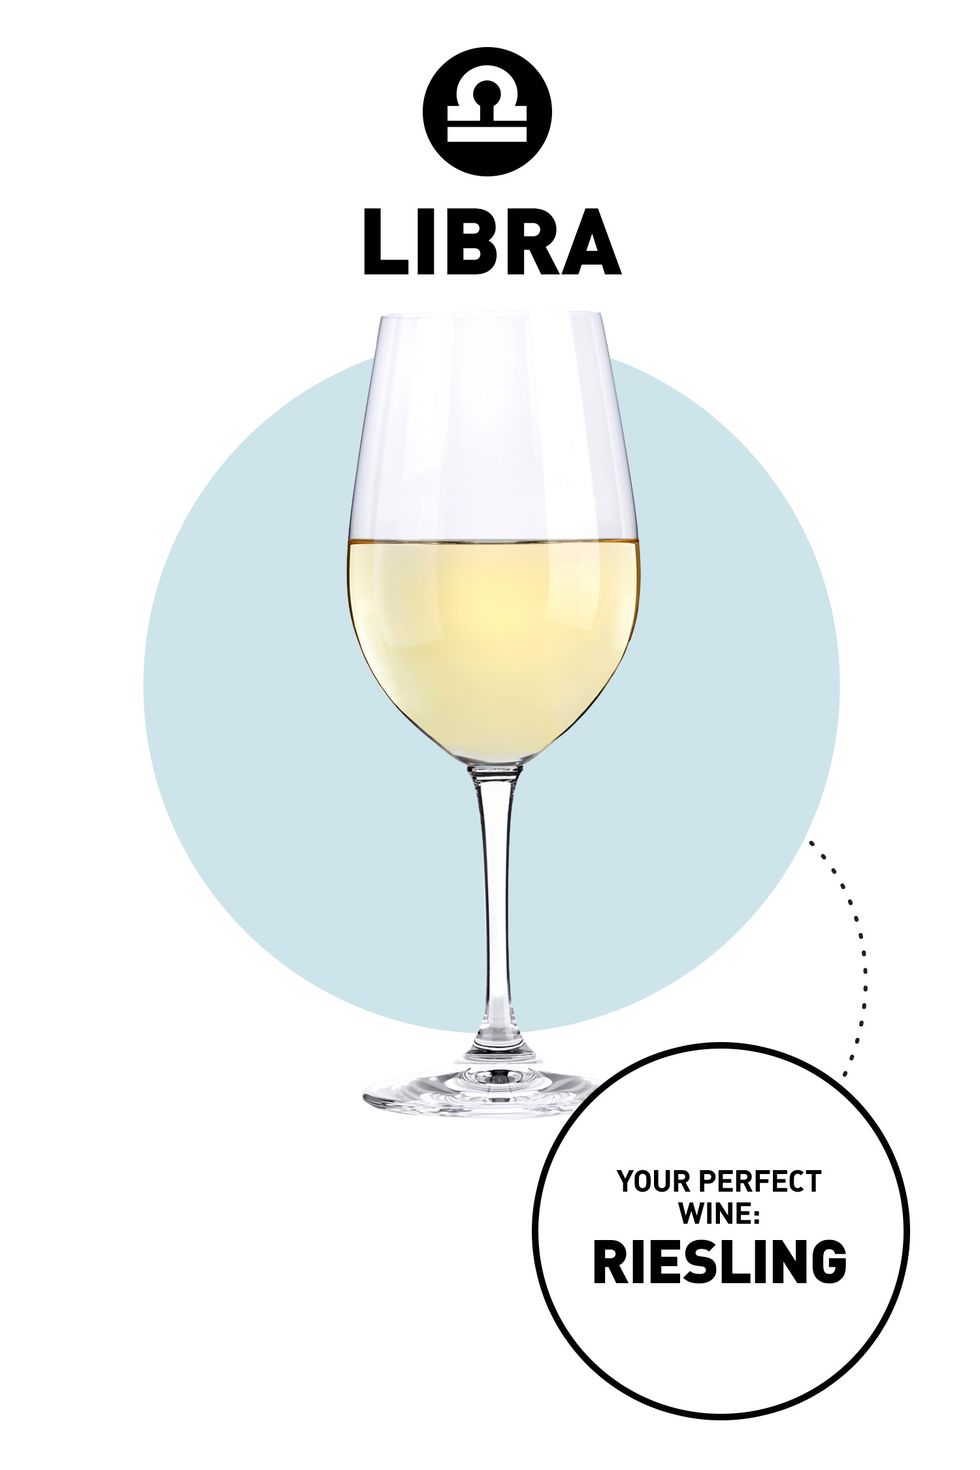 <p><strong>Your Drink:</strong> Riesling</p><p><strong>Why: </strong>Most people think of Riesling as a sweet wine, but it actually pairs with just about anything—even spicy foods, which clashes with most wines. Not only does it reflect Libras' ability to get along with anyone, but it appeals to the unbridled joy you feel when your drink perfectly complements (and enhances) your meal. It's the no-fail choice for whatever's on the menu.</p>